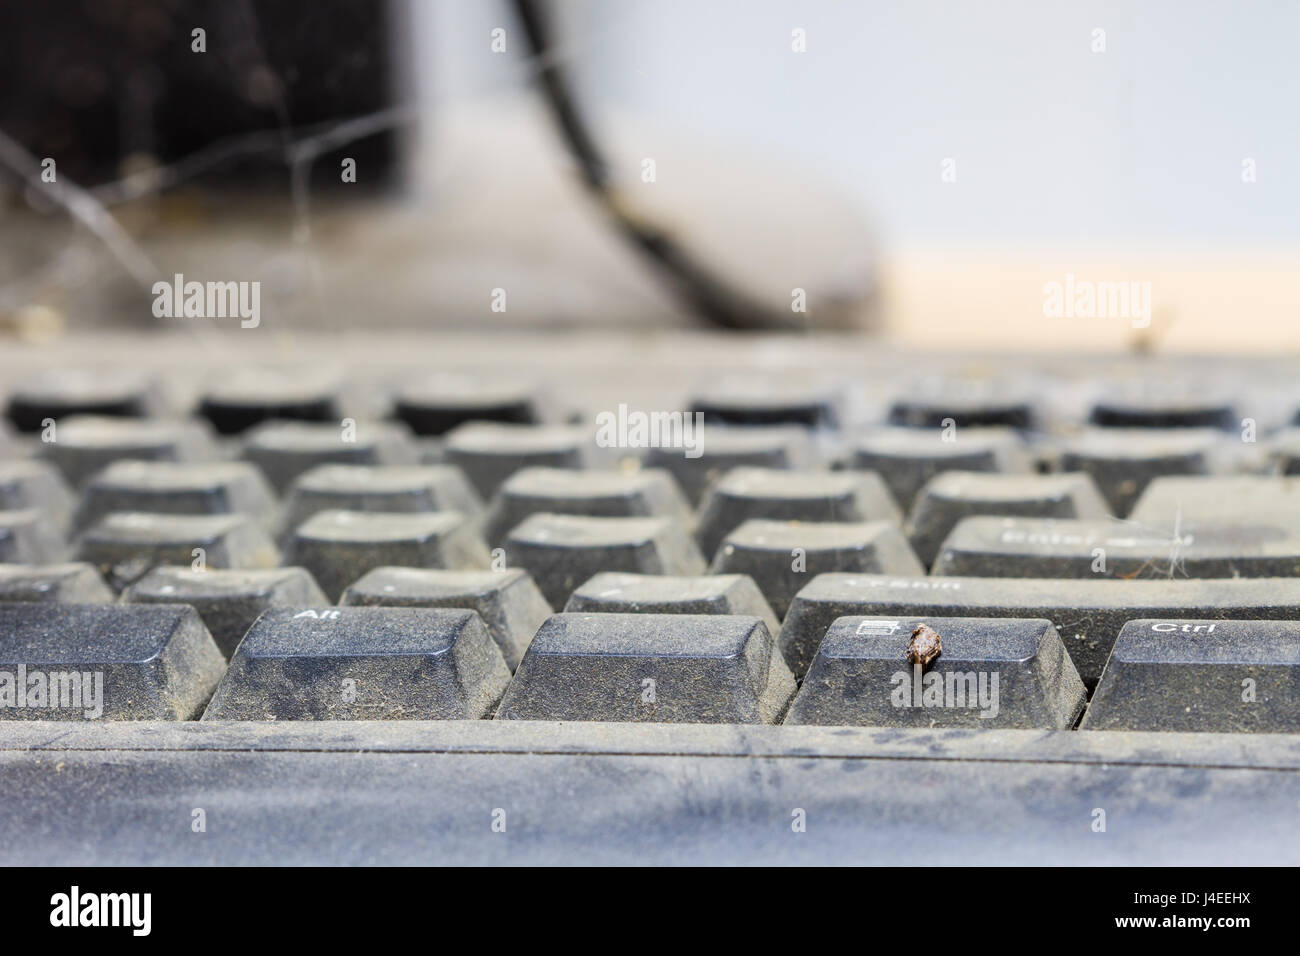 keyboard, computer with full of dust and cobweb Stock Photo